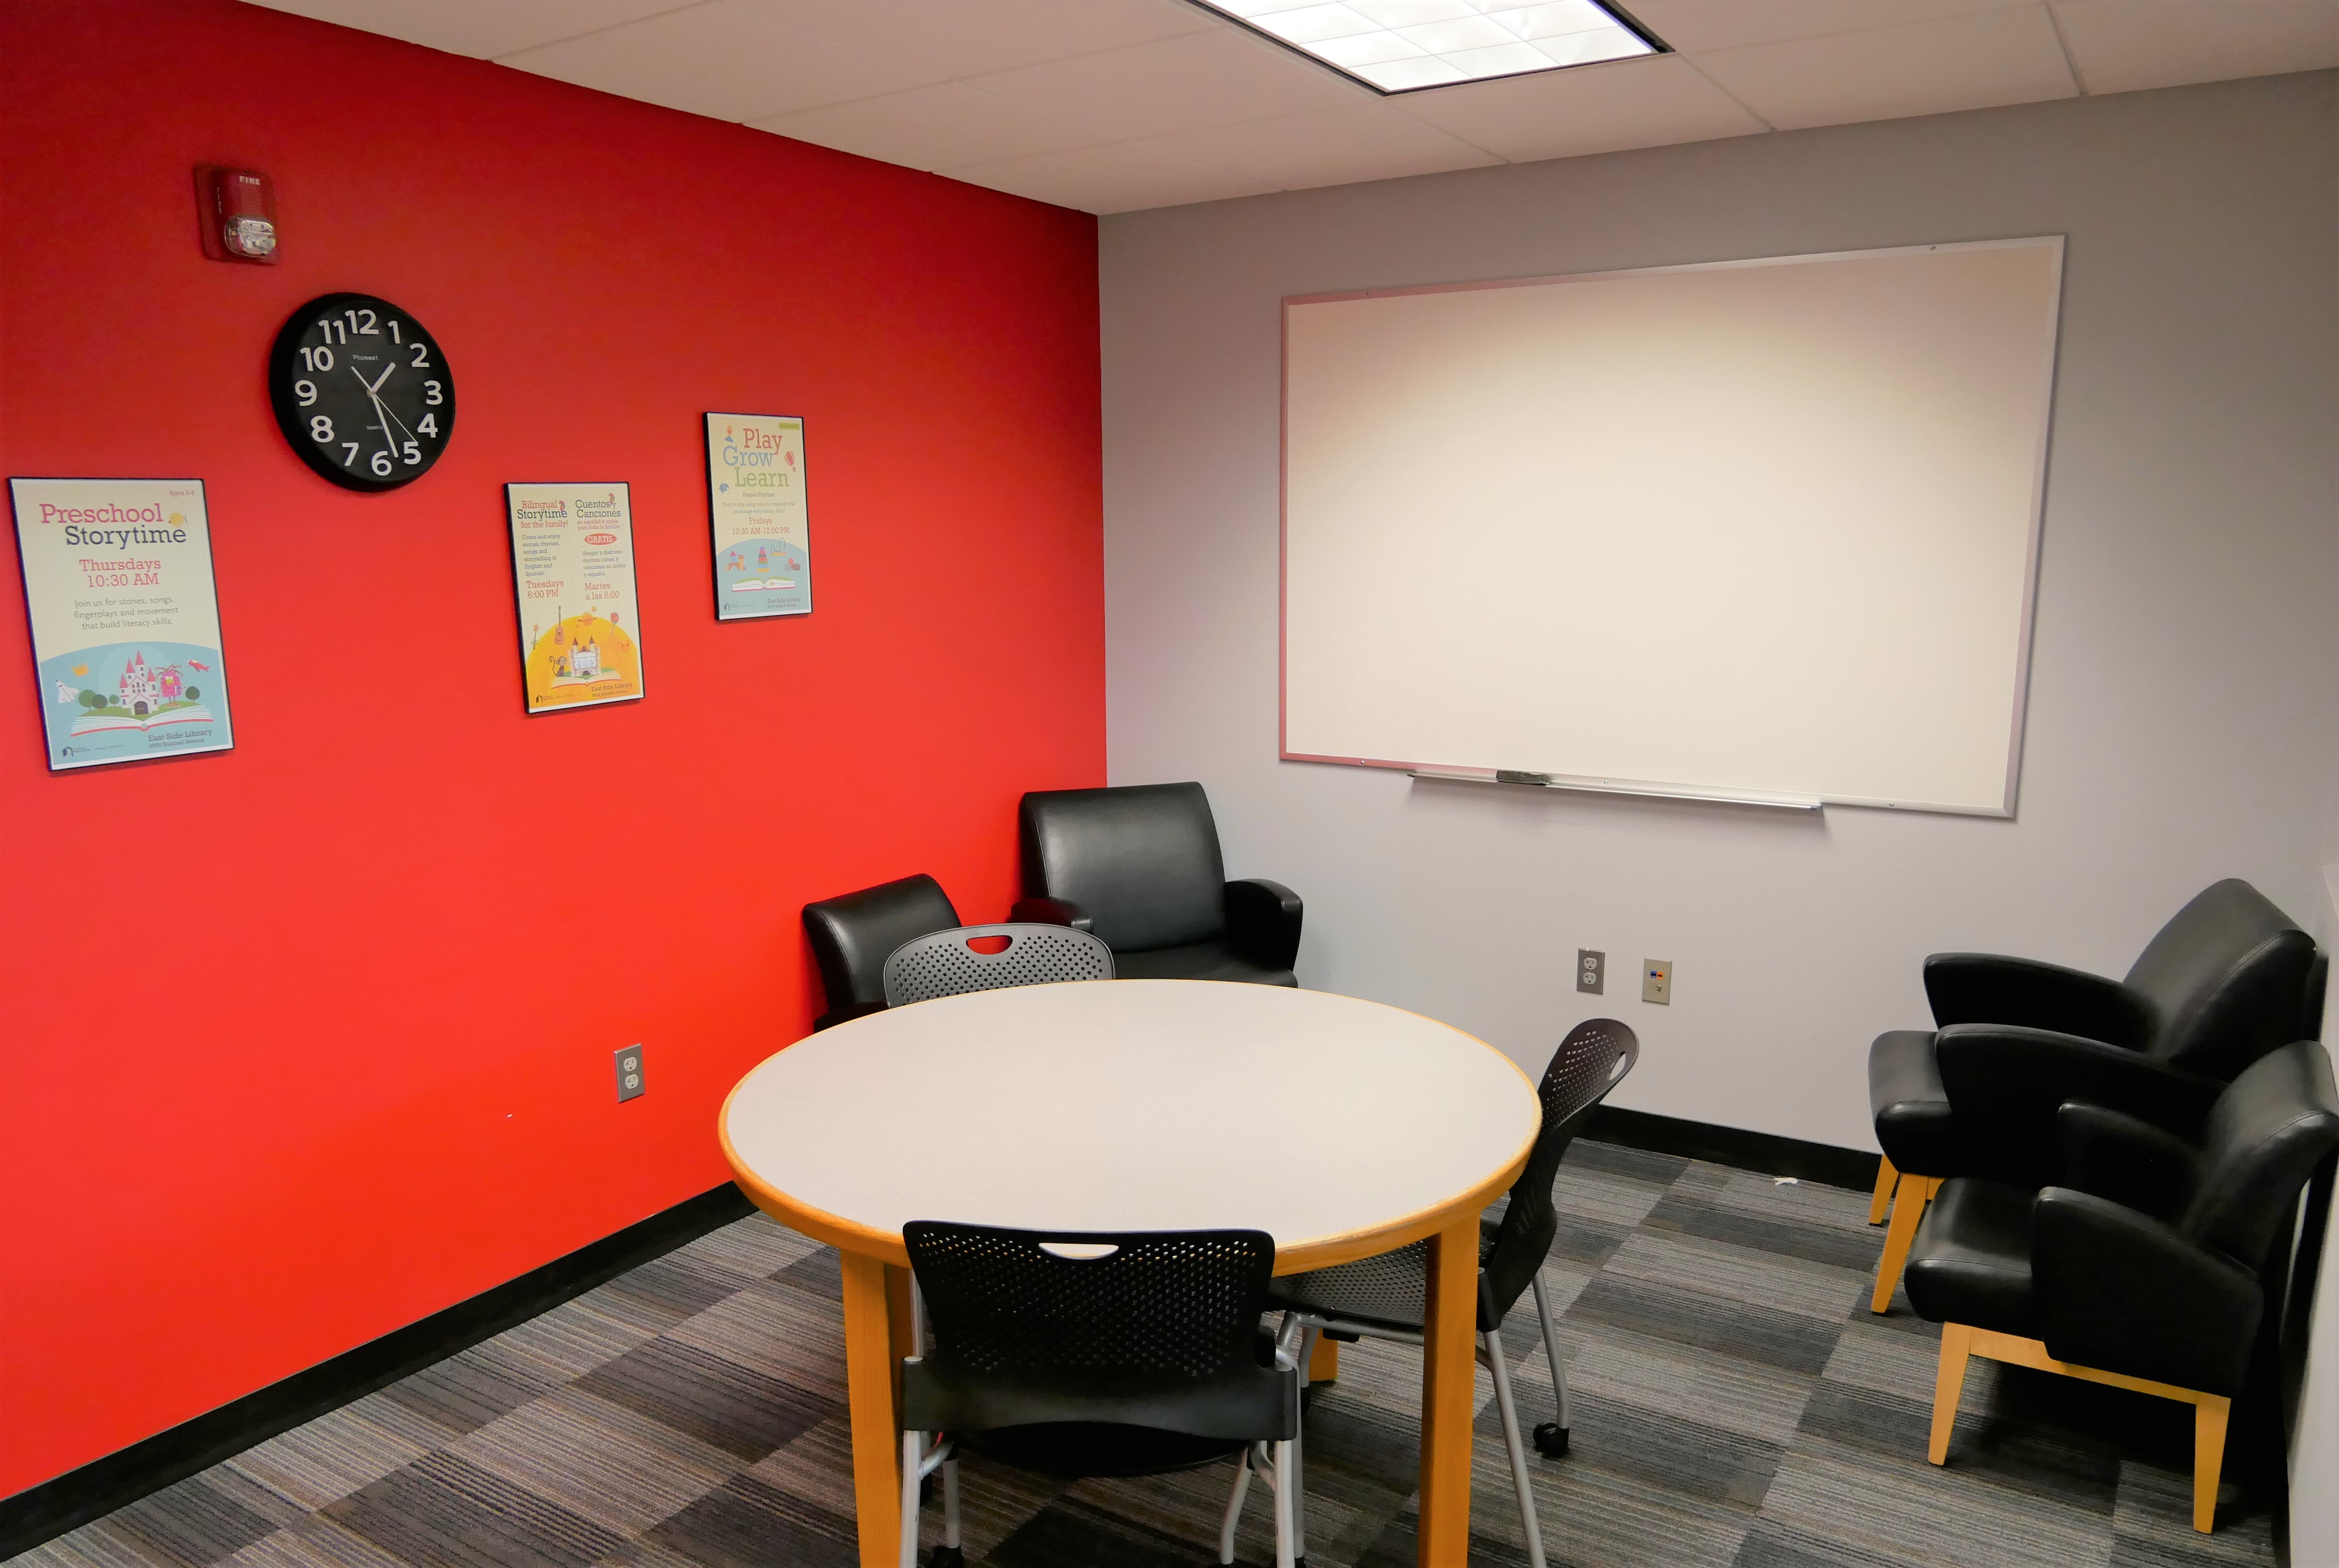 Large Study Room with circular table, chairs, and whiteboard